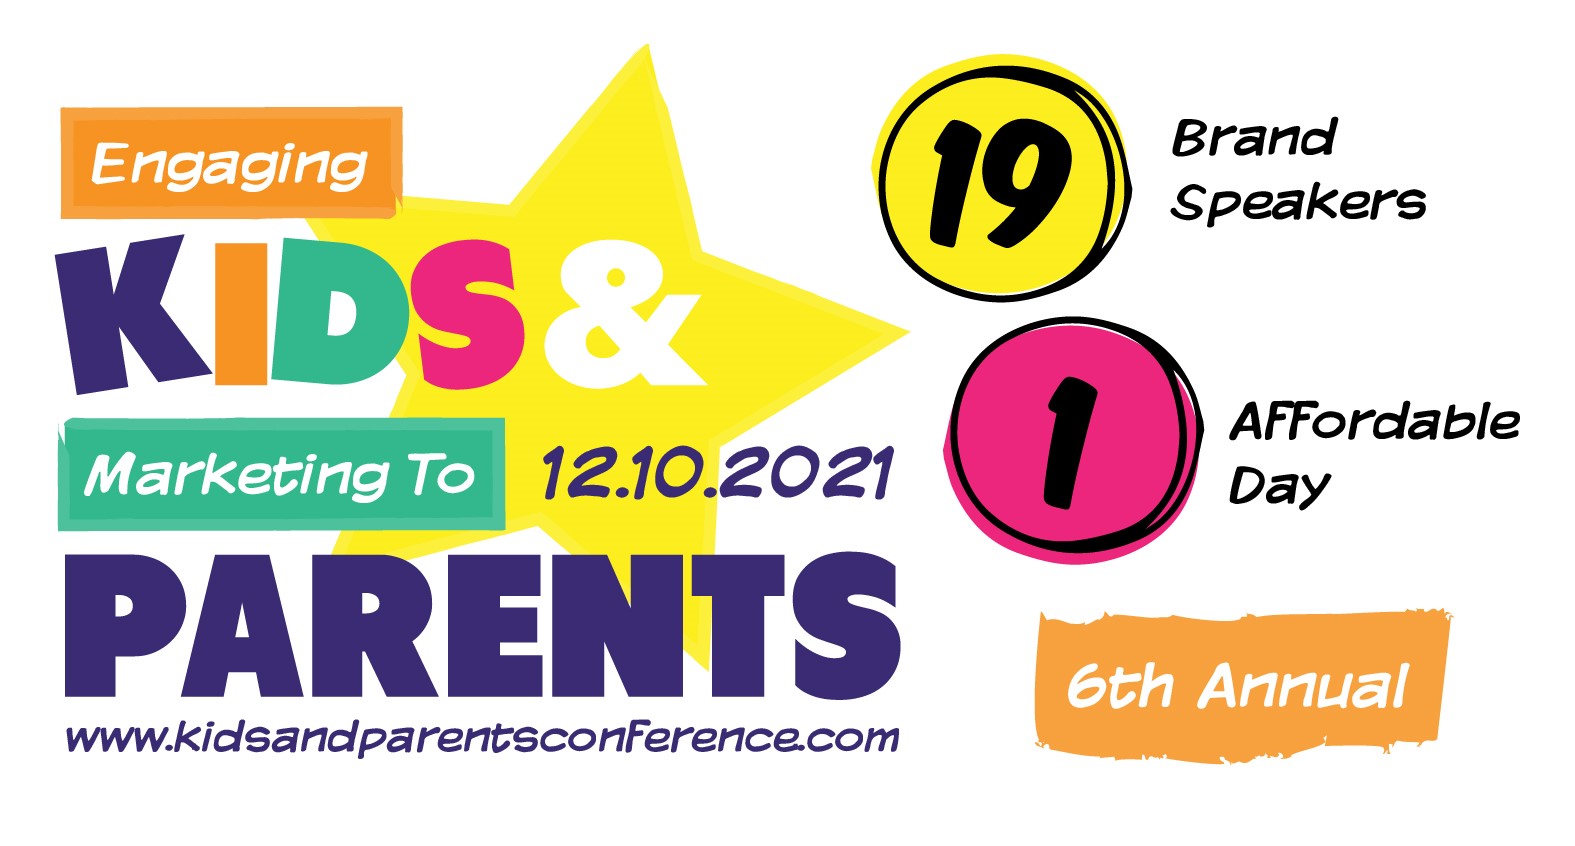 The Engaging Kids & Marketing to Parents Conference